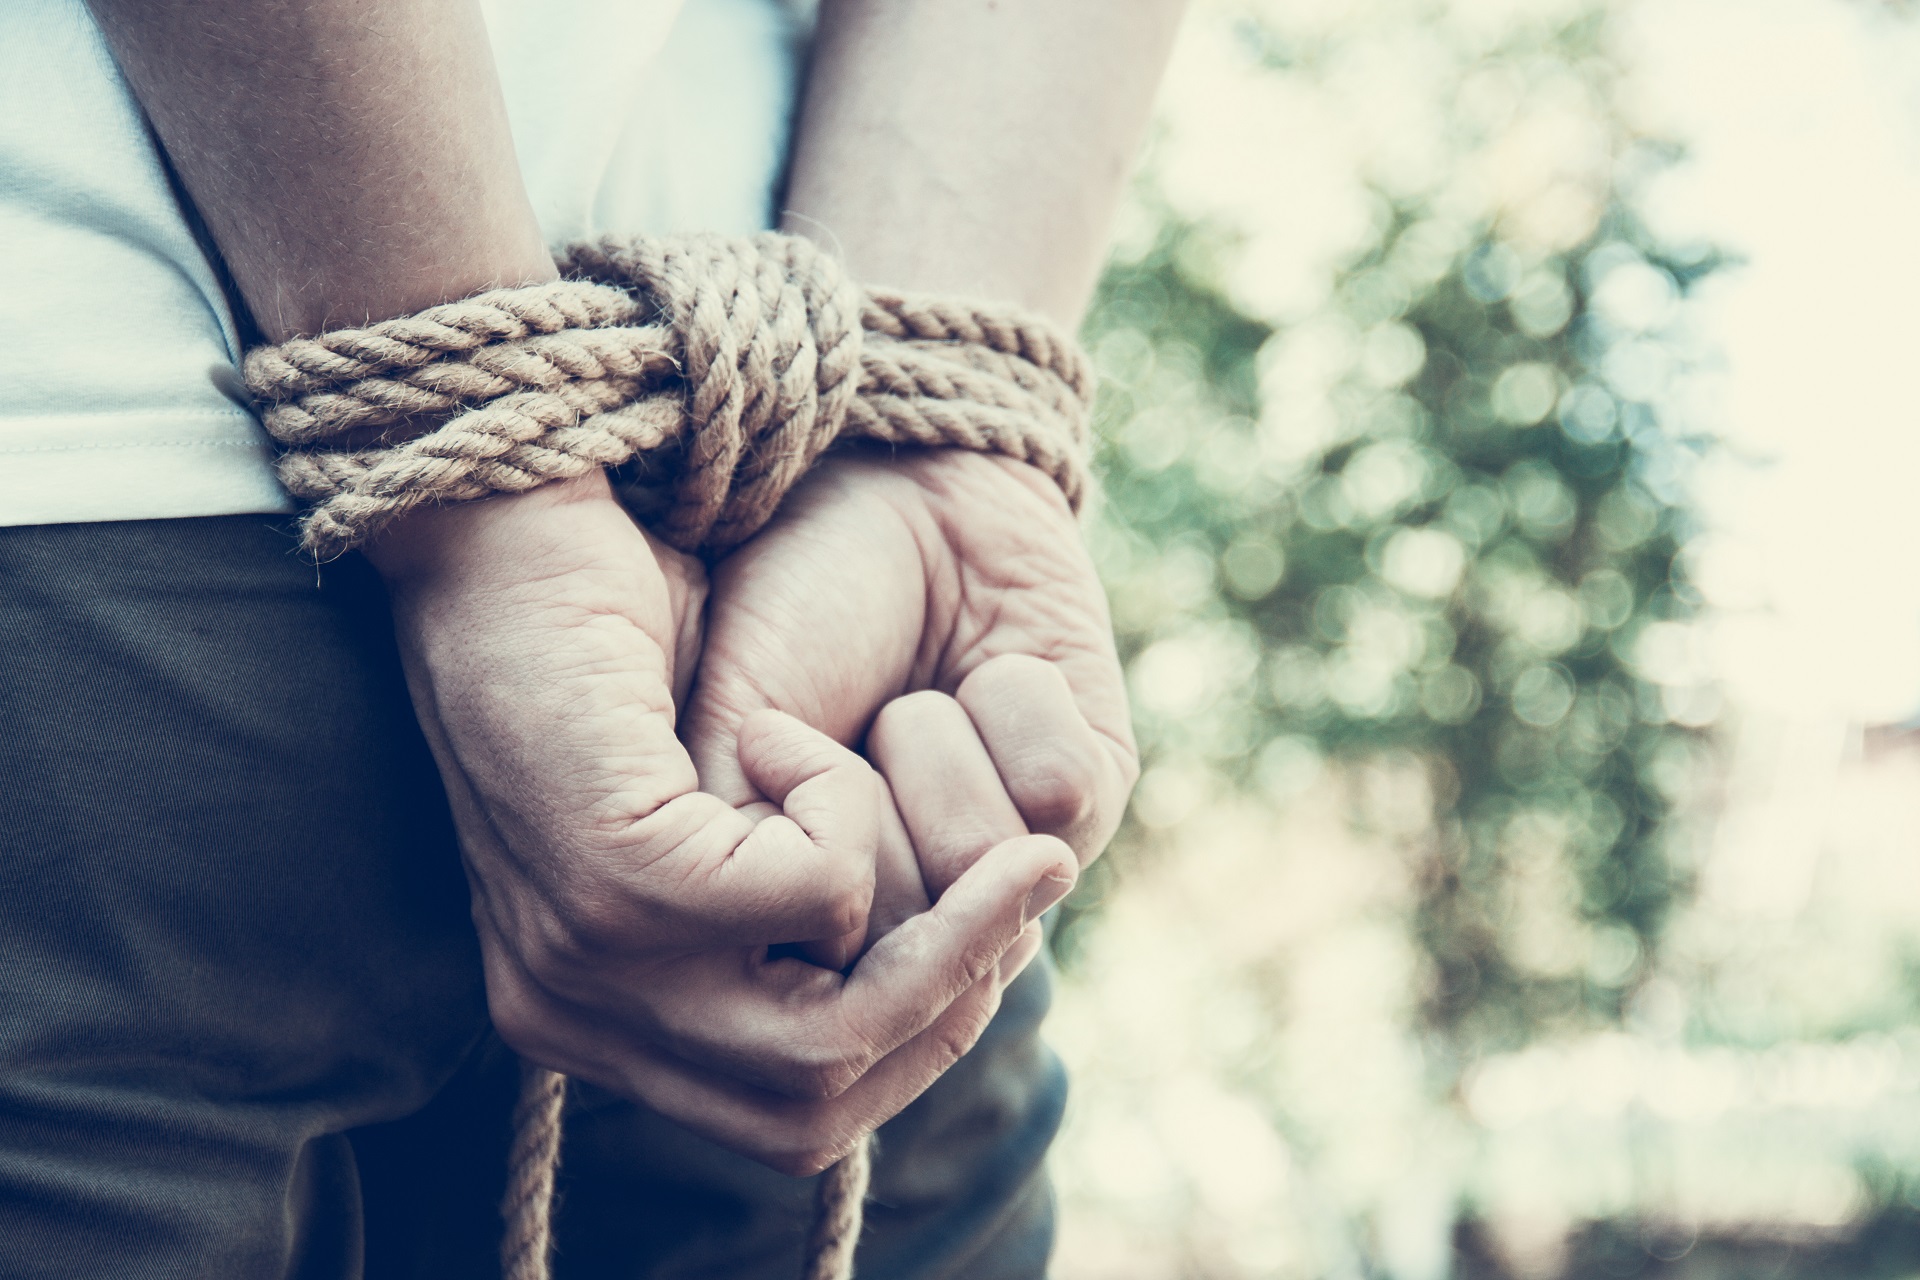 A Child's Hands Tied Up with Rope | Criminal Attorney in Los Angeles California​​​​ | Wegman & Levin